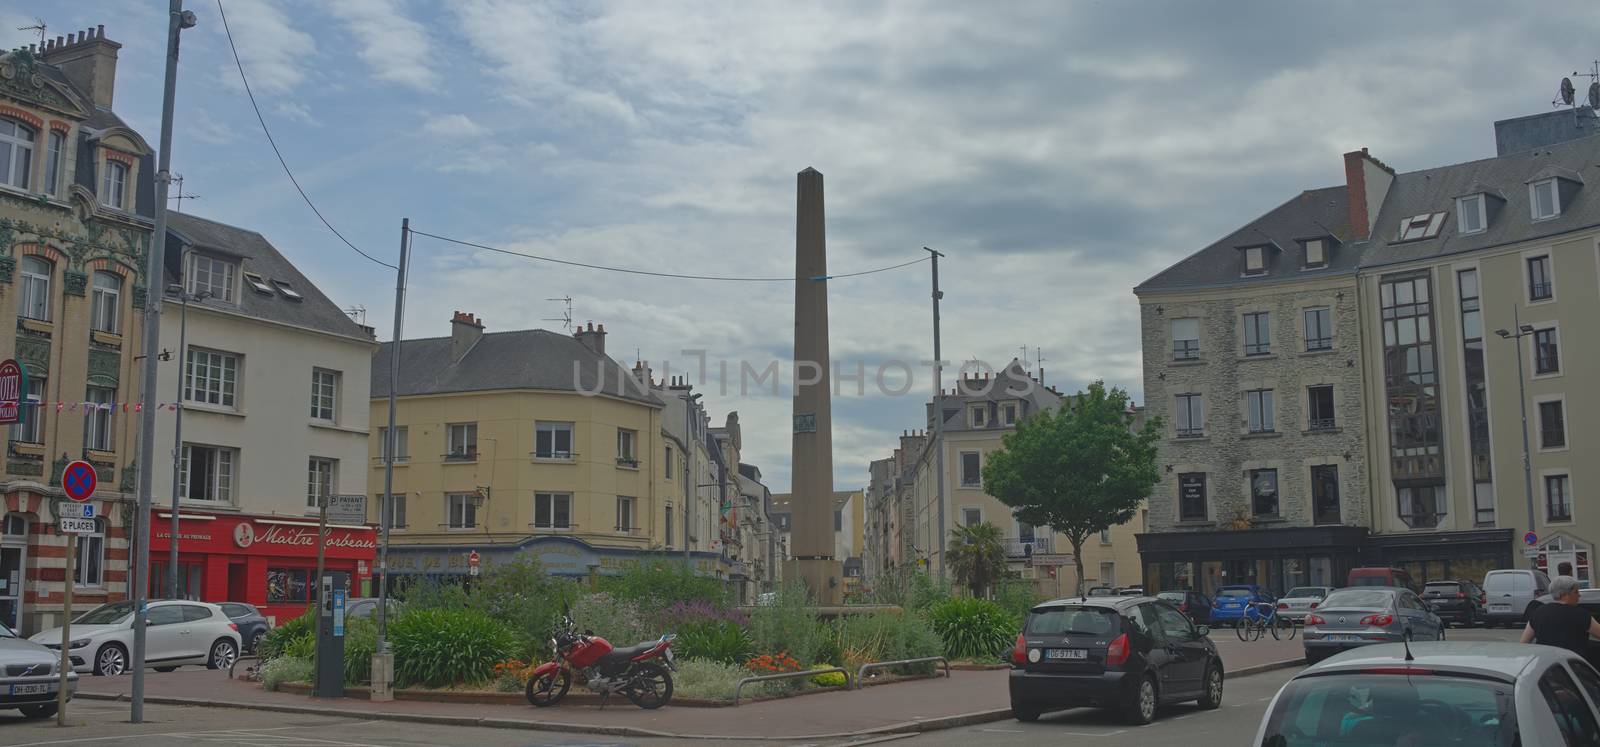 CHERBOURG, FRANCE - June 6th 2019 - City square with big obelisk in the middle by sheriffkule